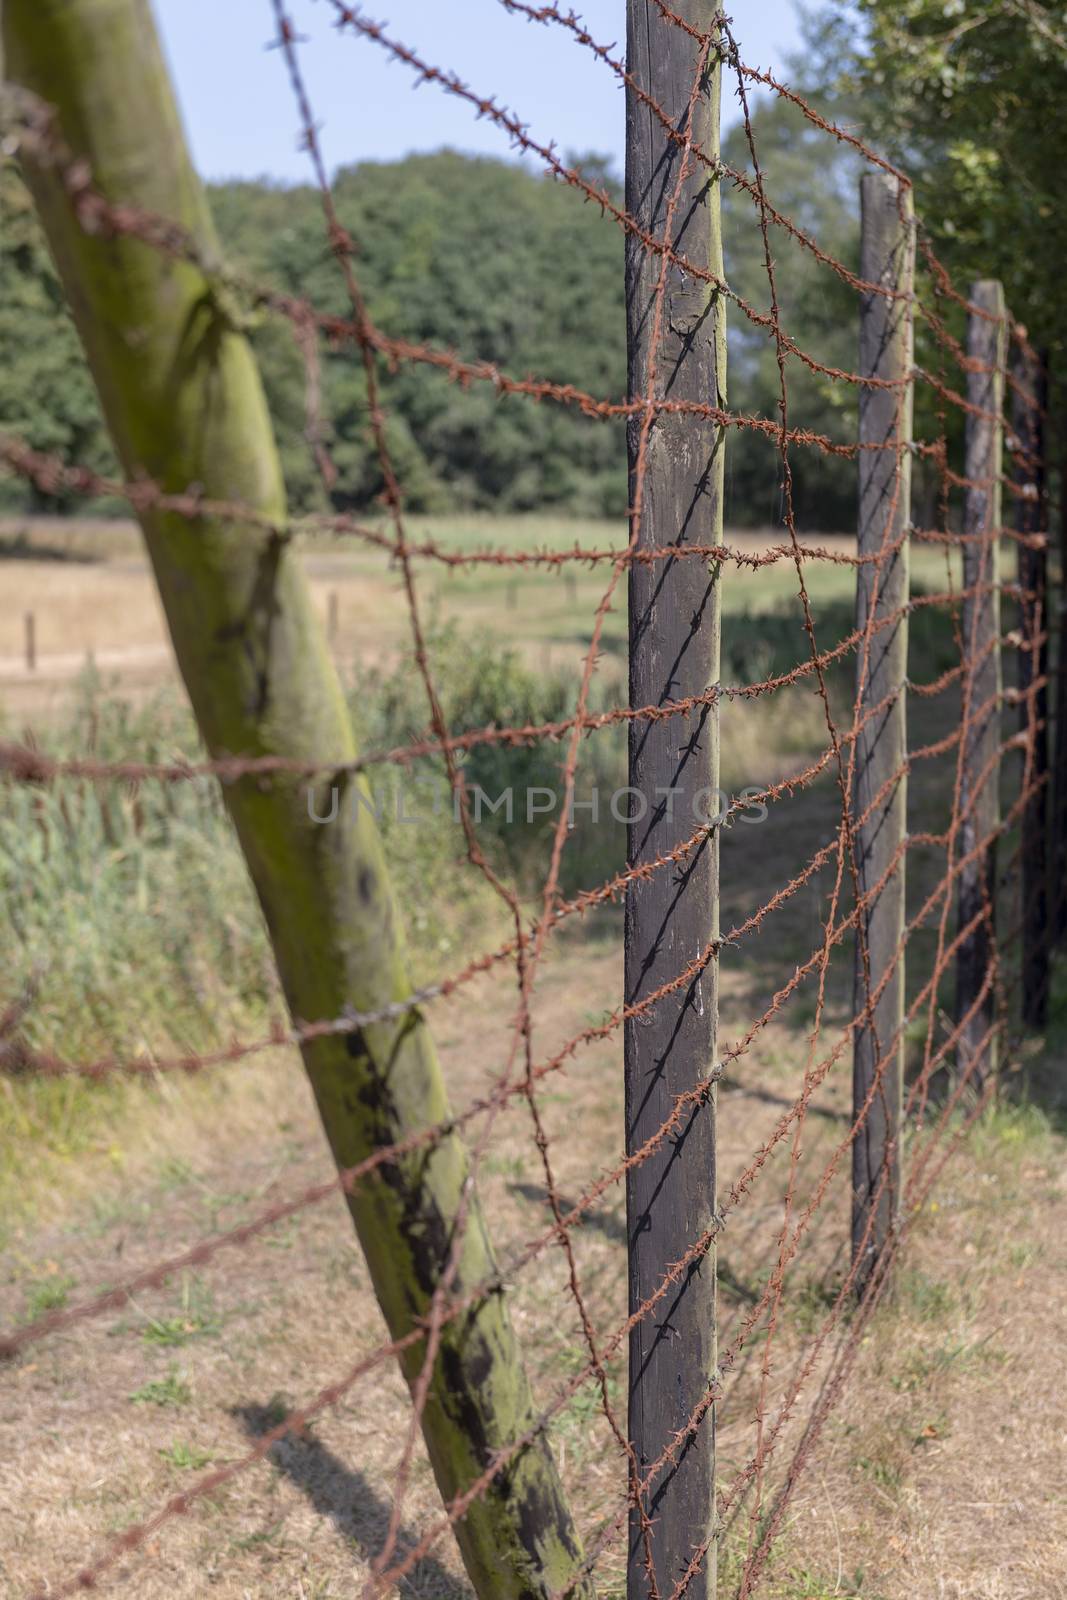 High wooden fence with rusty barbed wire
